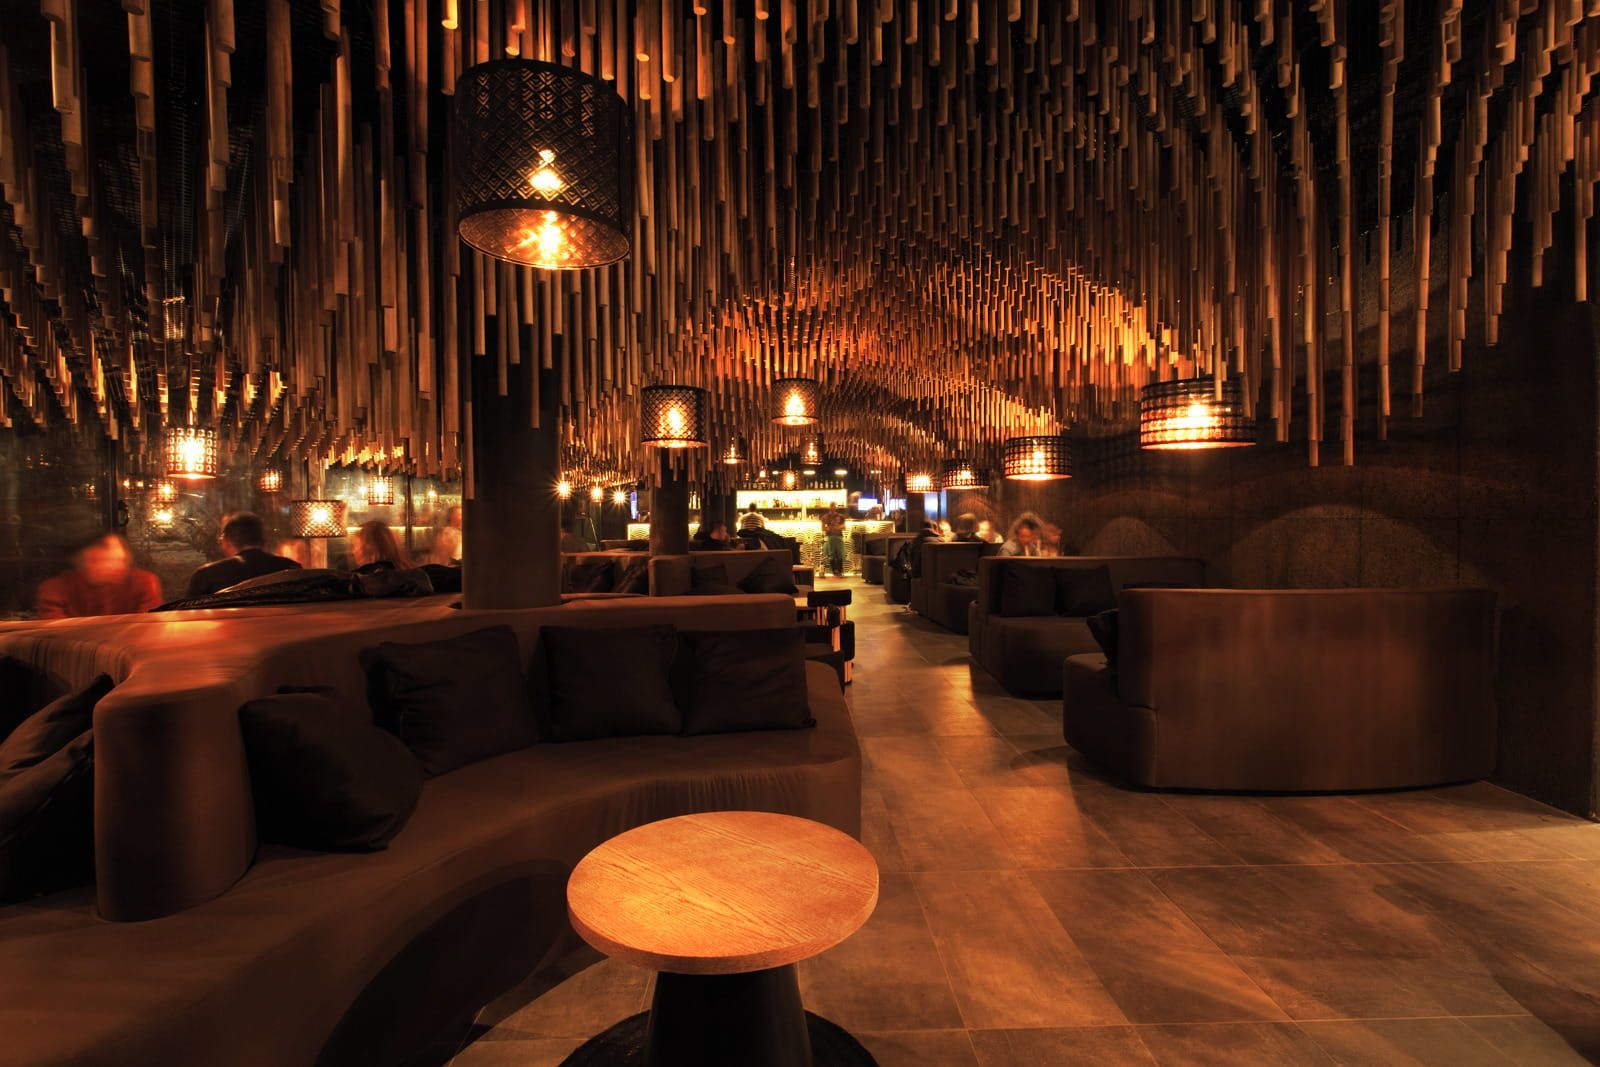 the wood cylinders hanging from the ceiling above the seating area in dim light